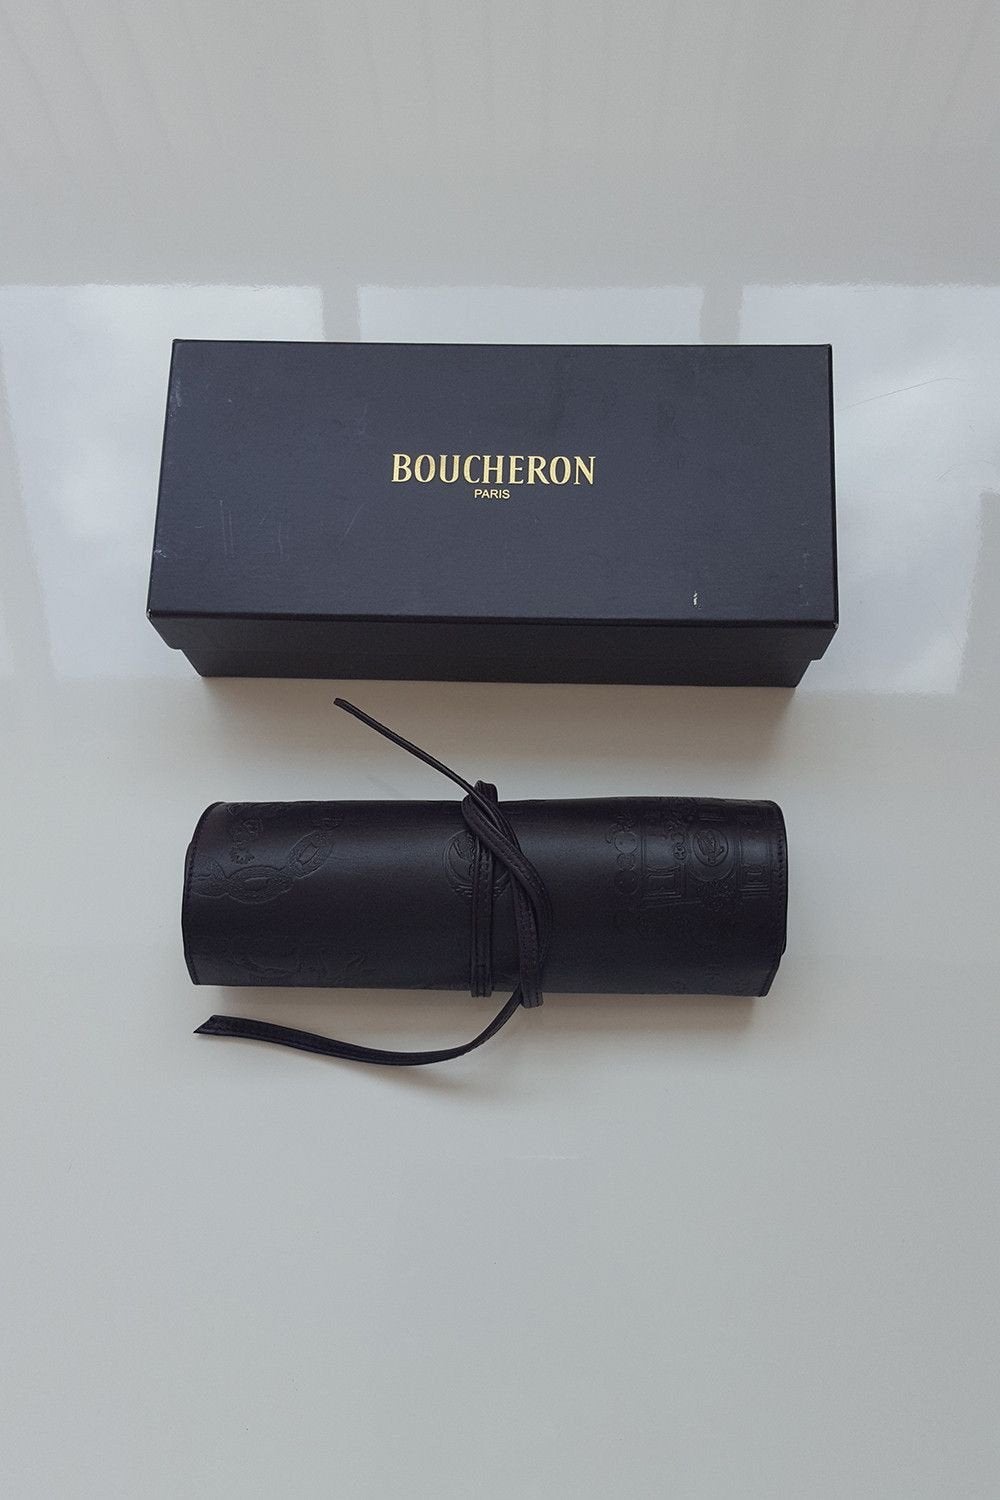 BOUCHERON Engraved Leather Jewellery Roll-Boucheron-The Freperie